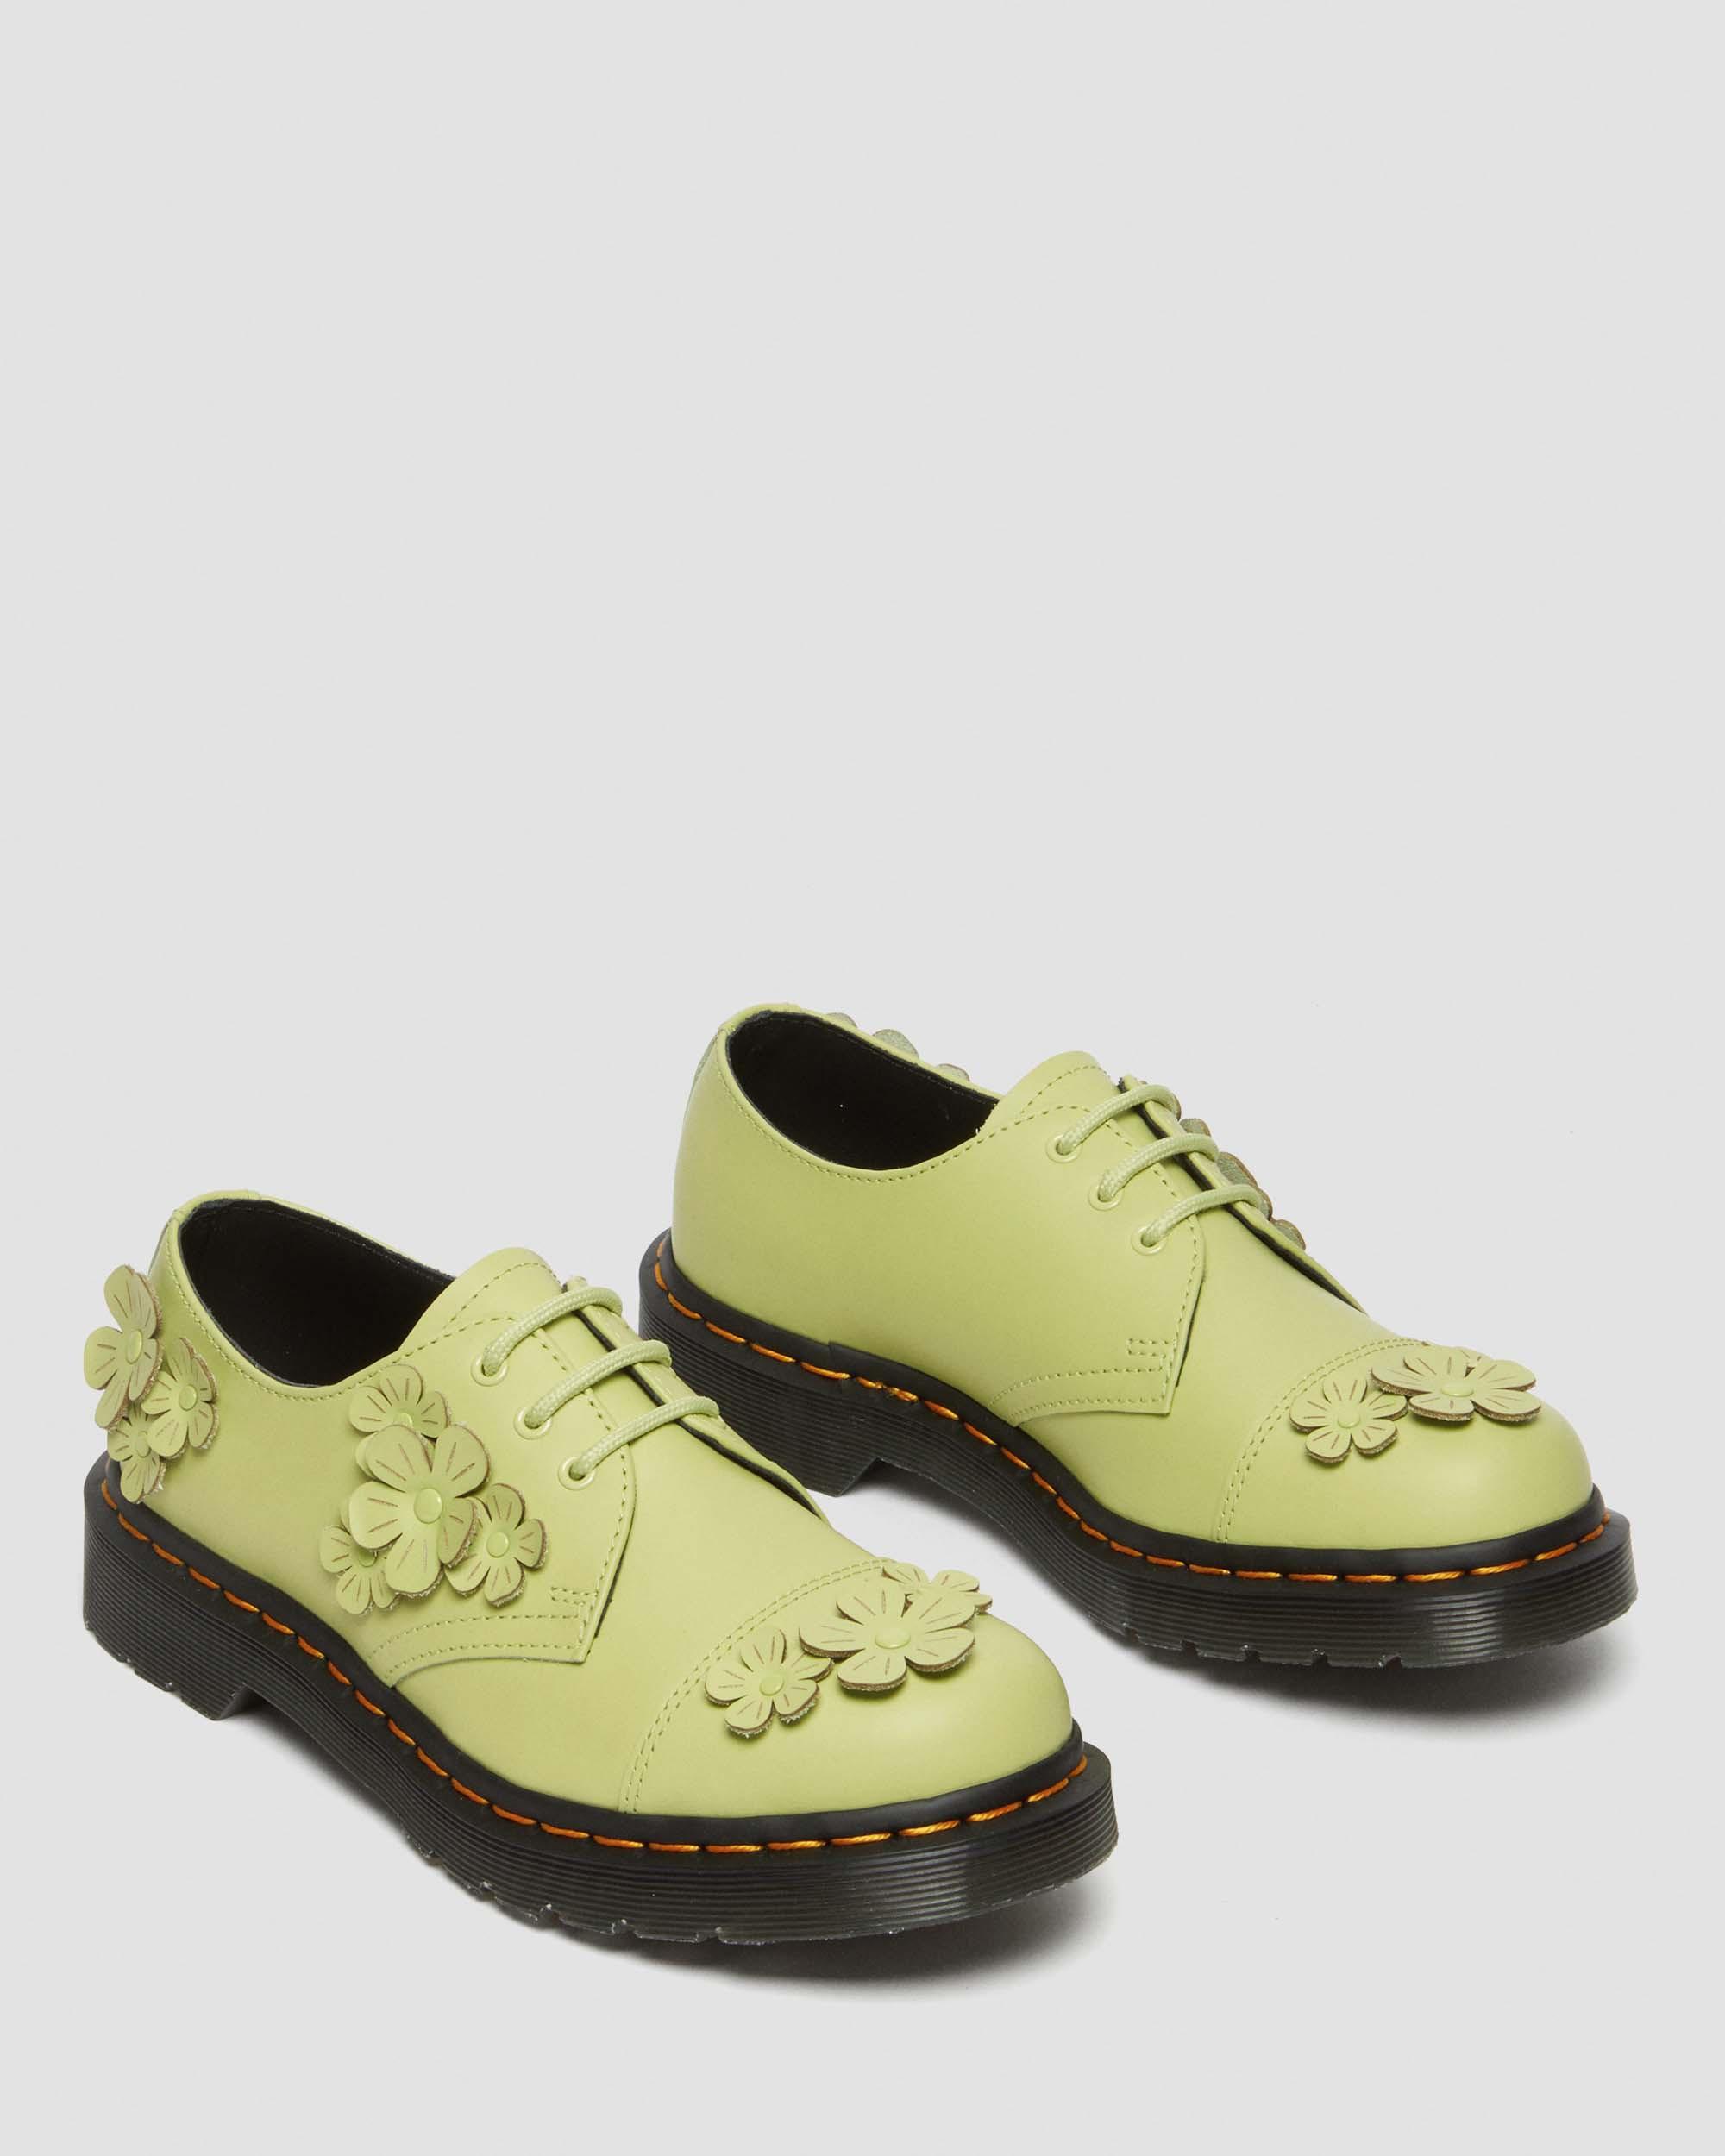 Shop Dr. Martens' 1461 Flower Applique Leather Oxford Shoes In Green